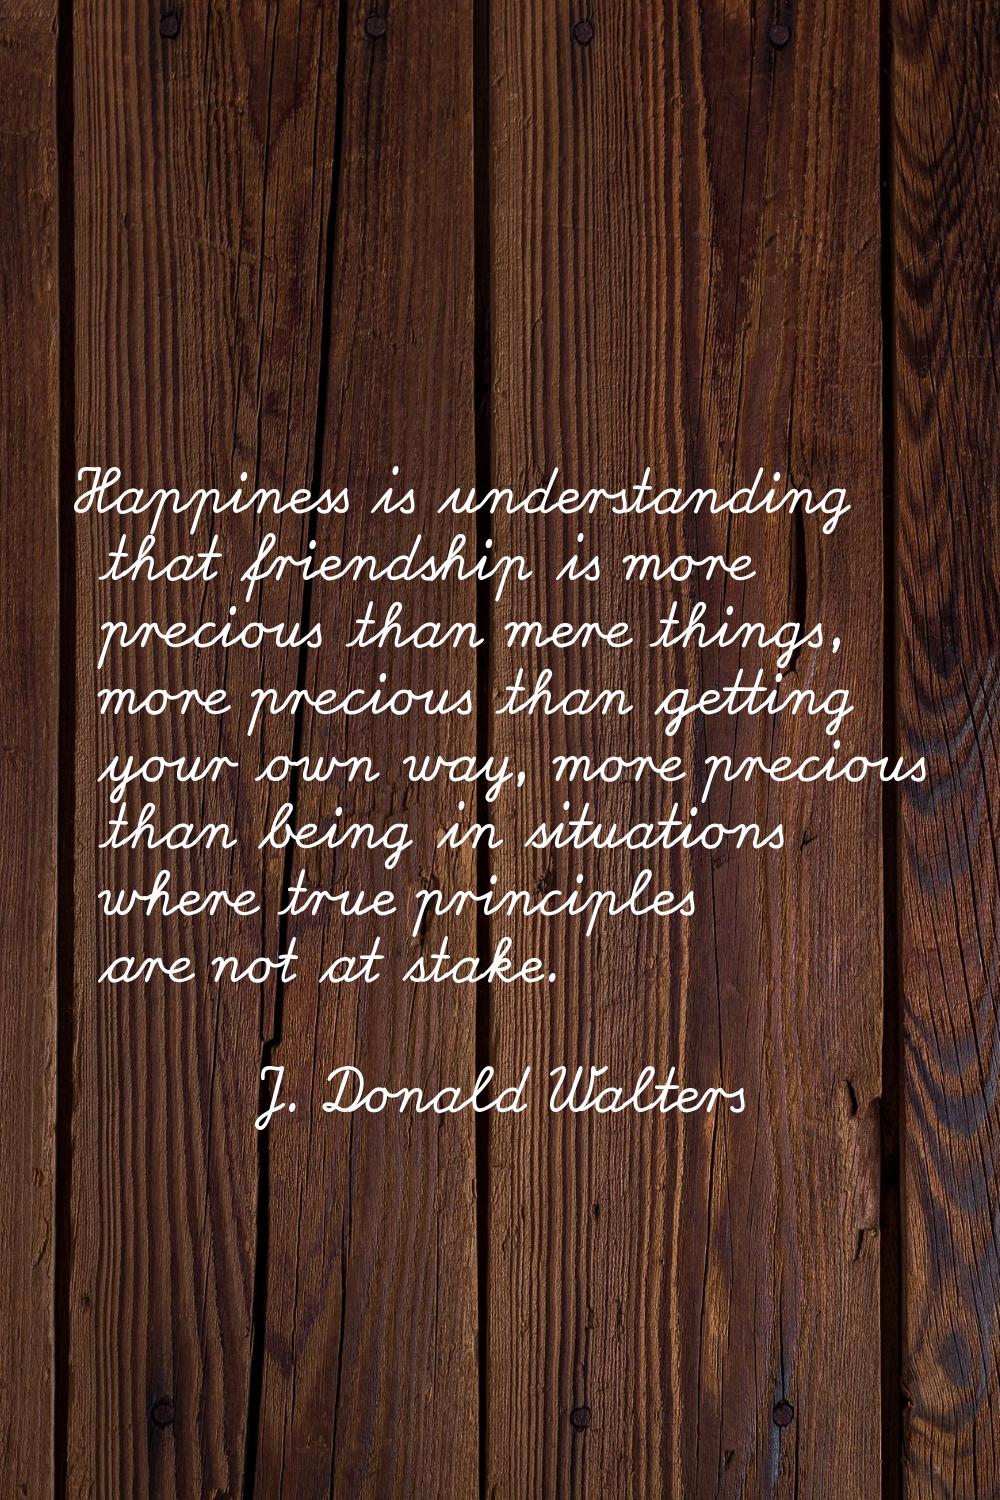 Happiness is understanding that friendship is more precious than mere things, more precious than ge